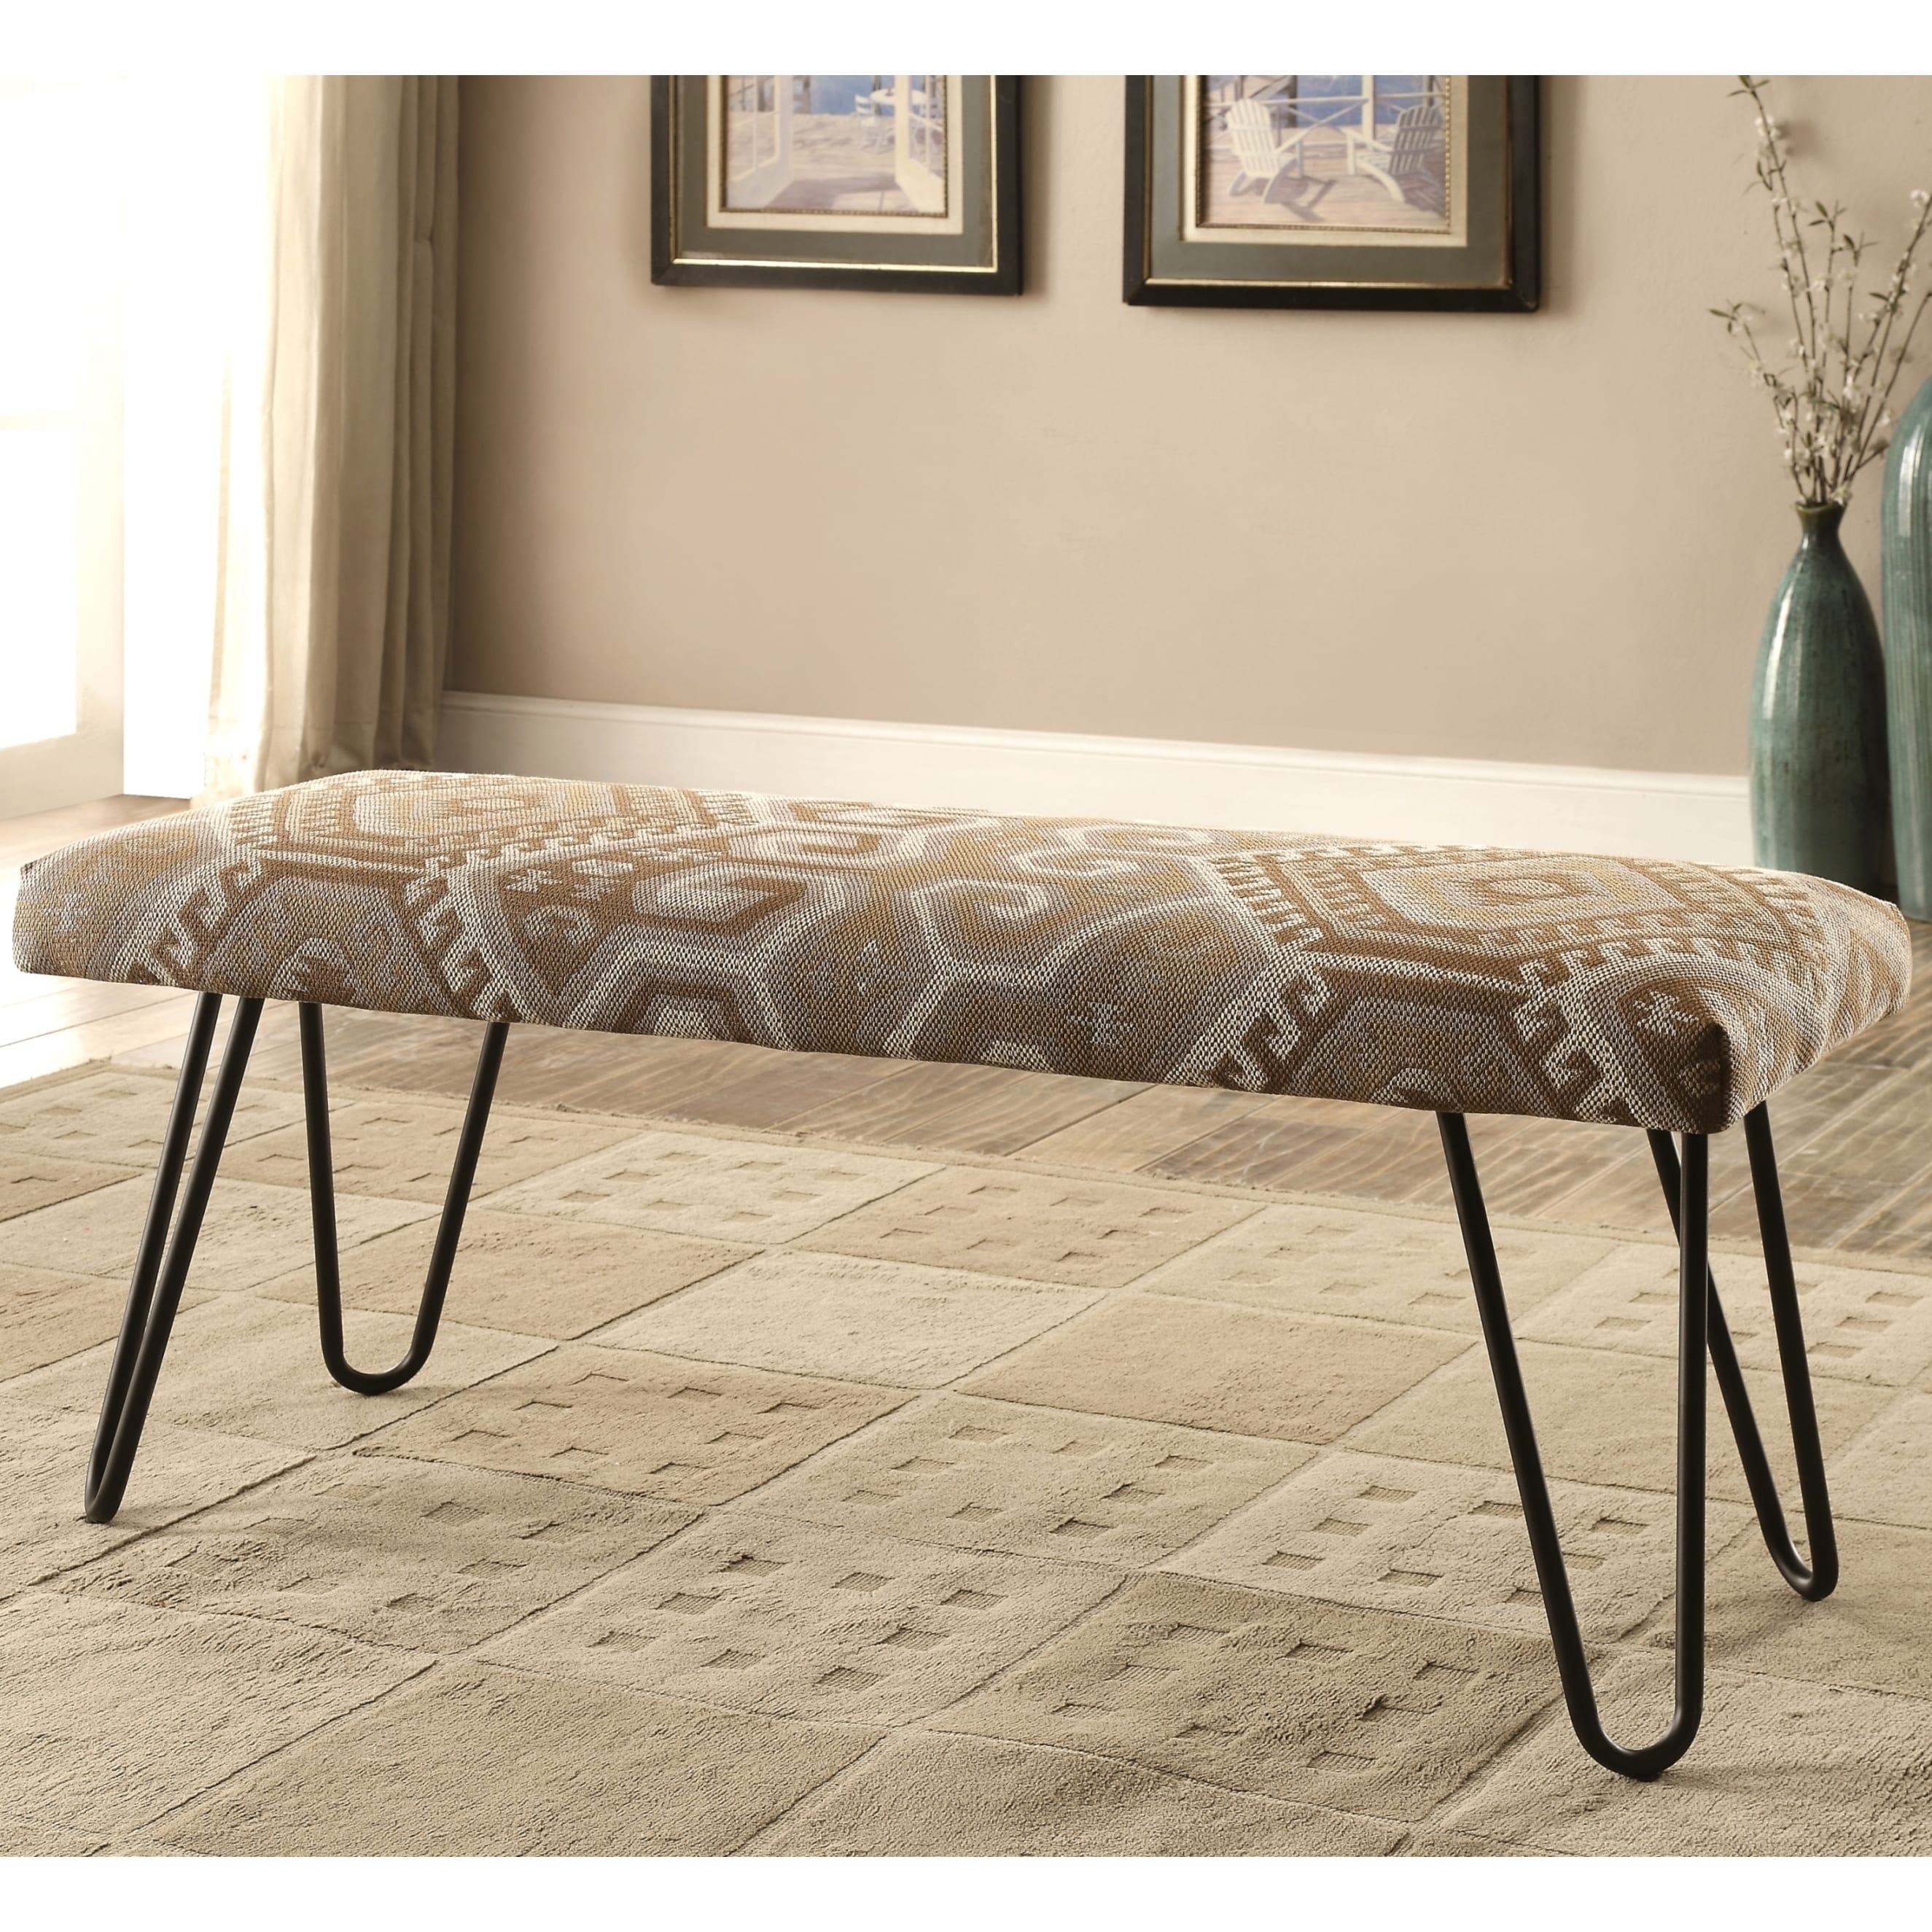 Mid Century Modern Southwestern Print Living Room Accent Bench With Hairpin Legs Overstock 16899375